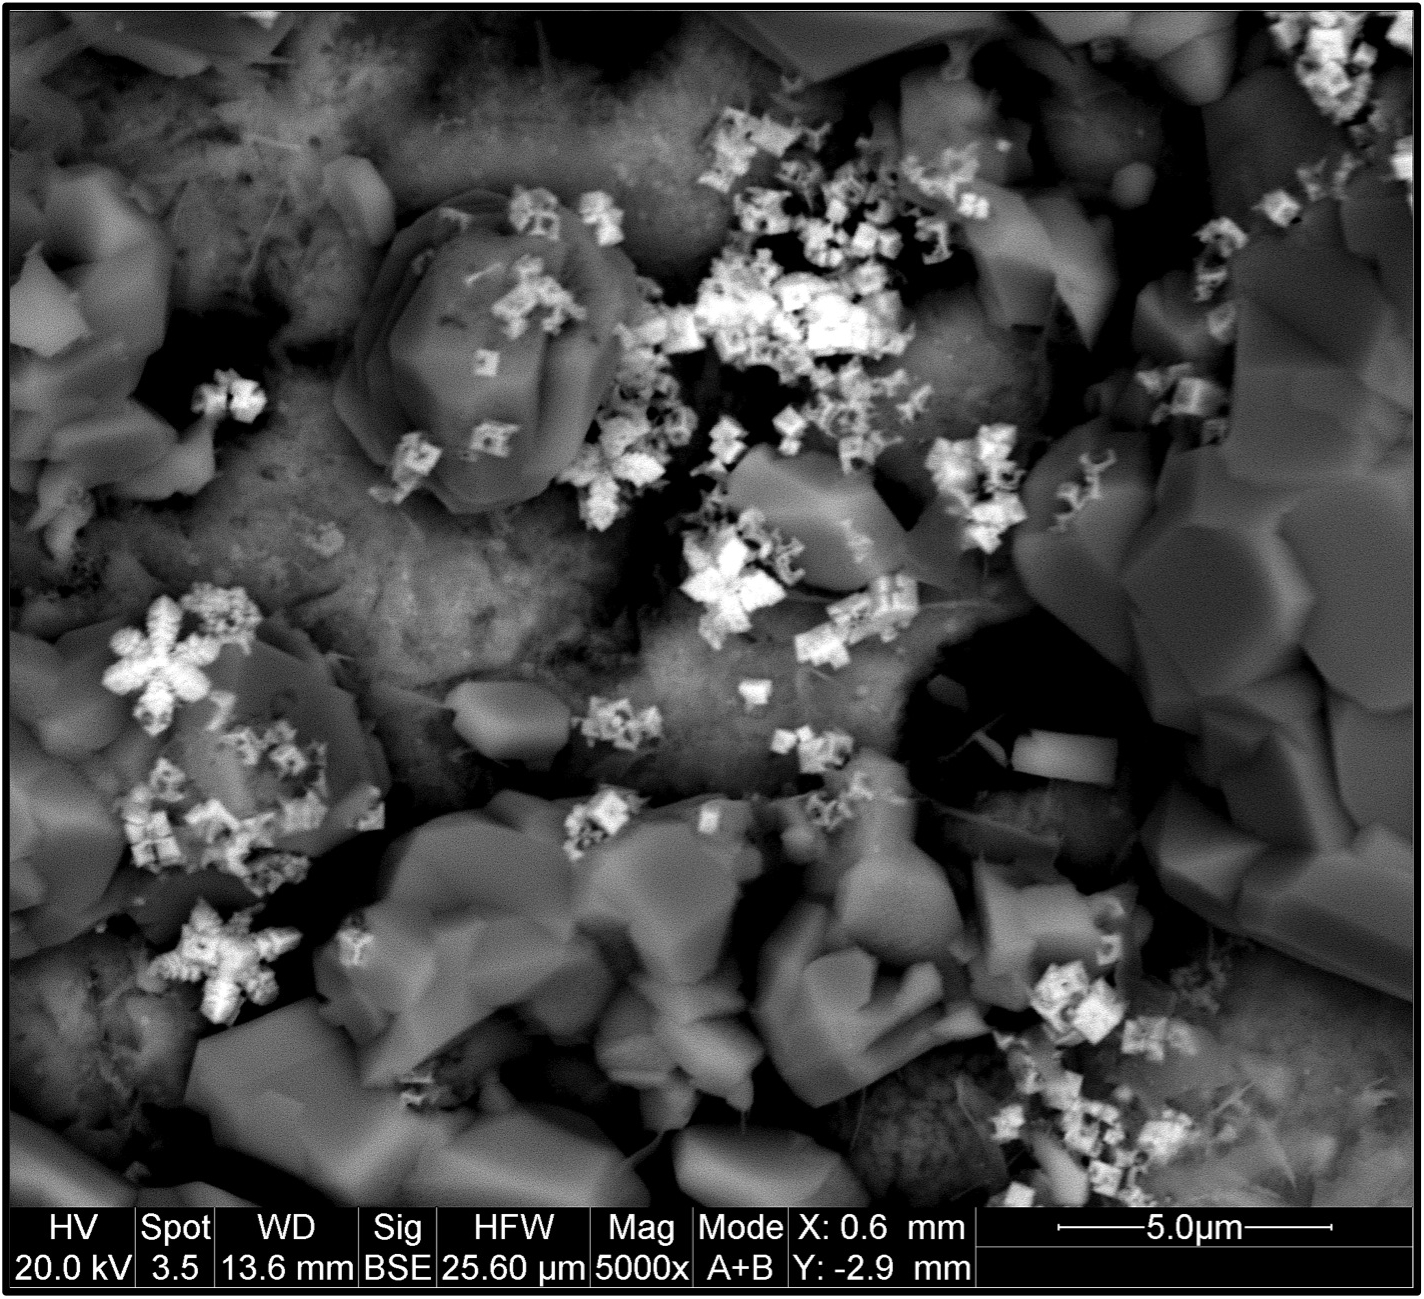 Scanning electron microscope image of bronze exposed to hydrogen sulfide.  The surface is decorated with small white crystals with the appearance of flowers due to lead sulfide.